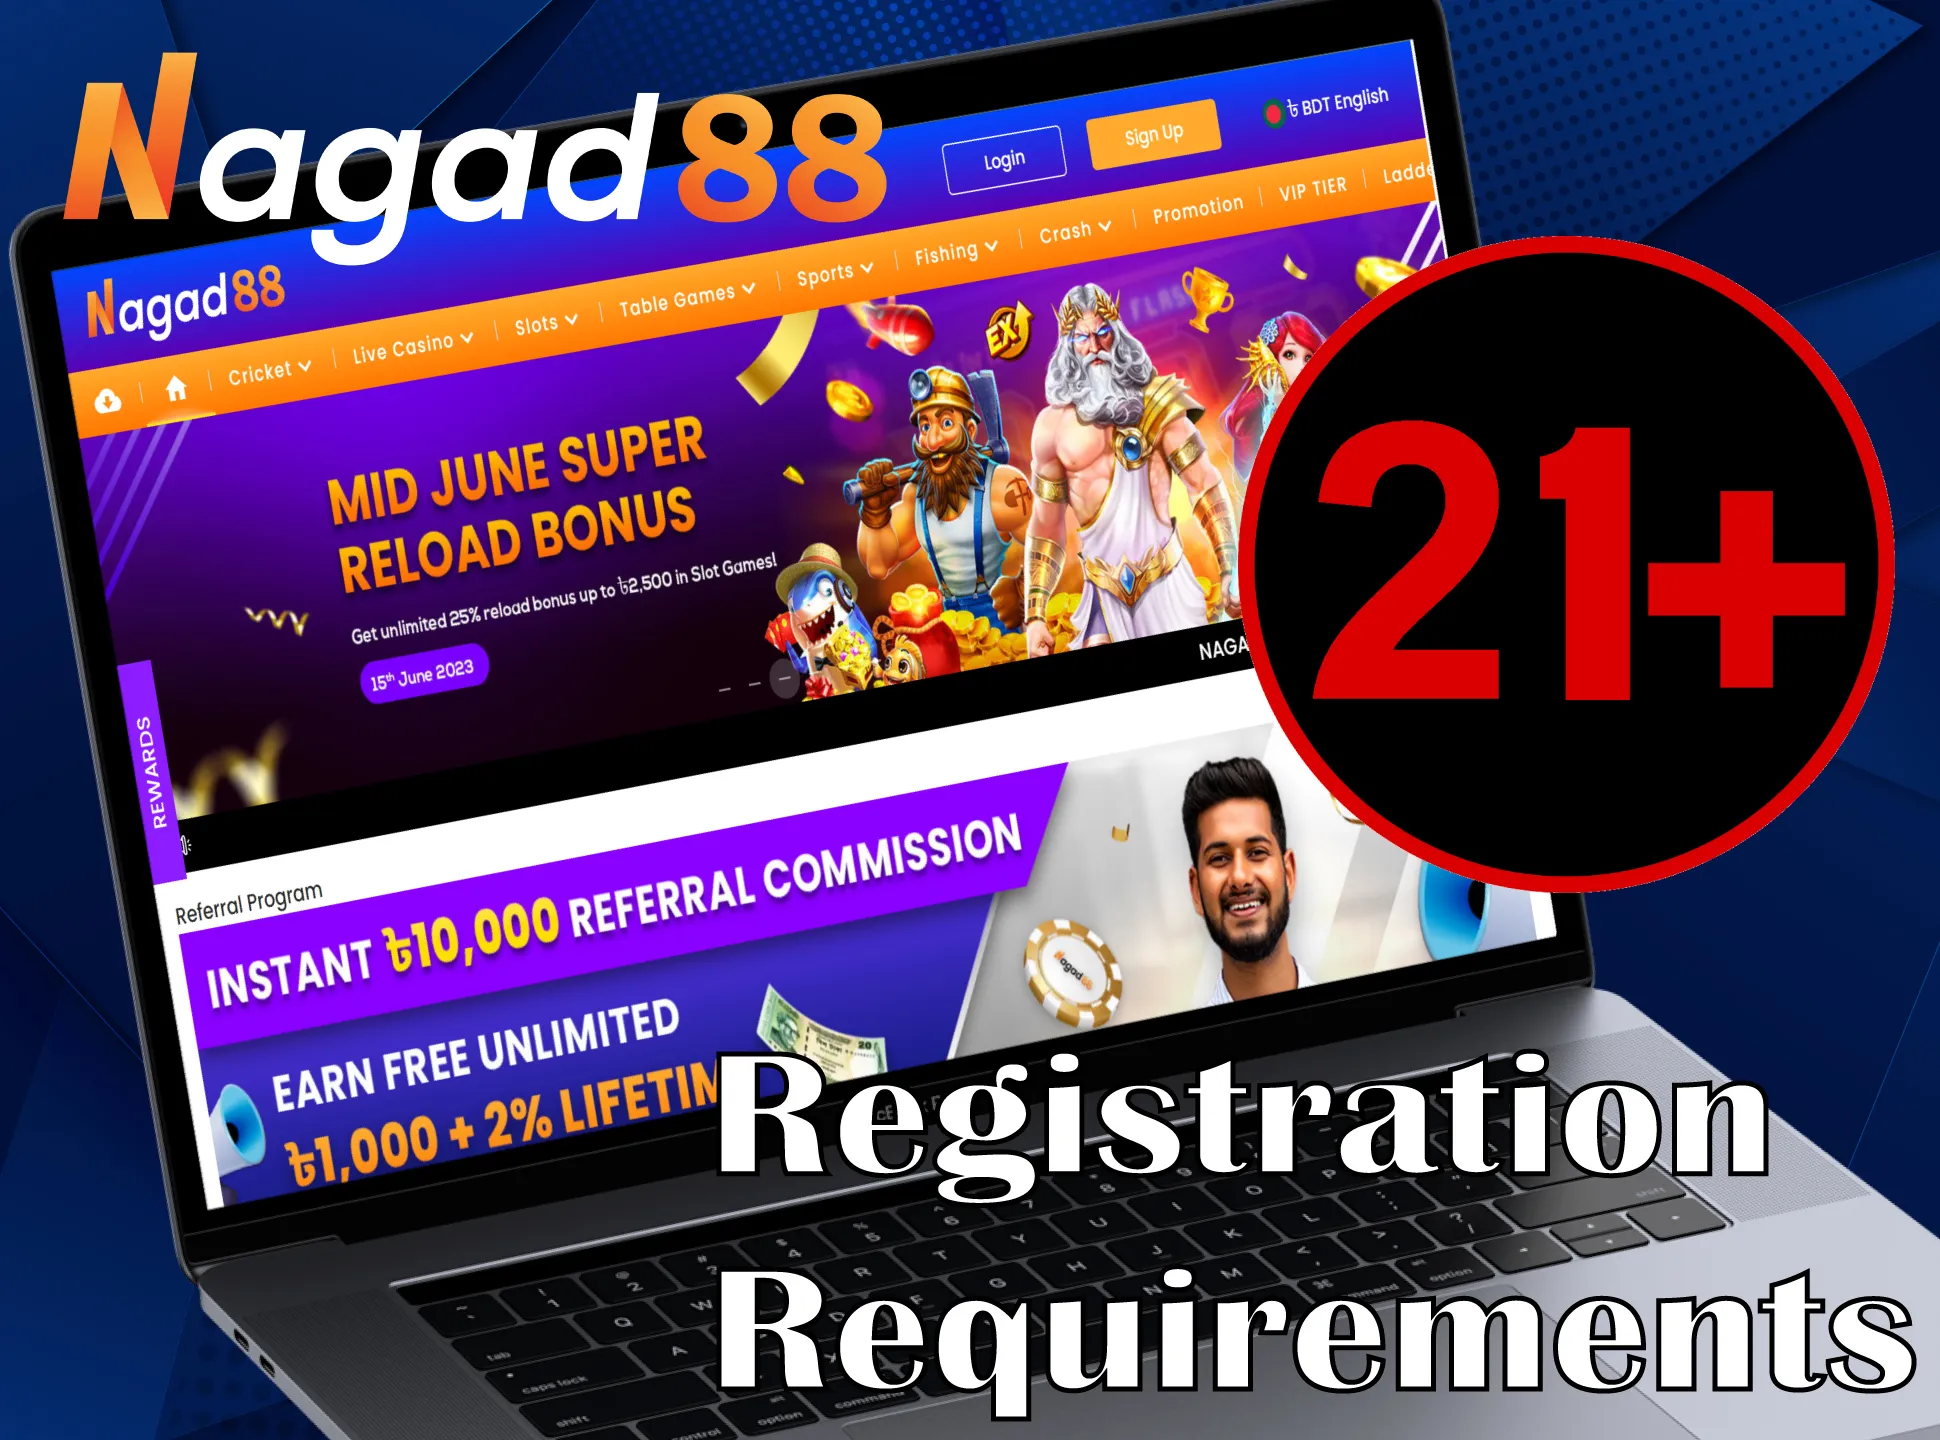 Read the simple rules for registering with Nagad88.